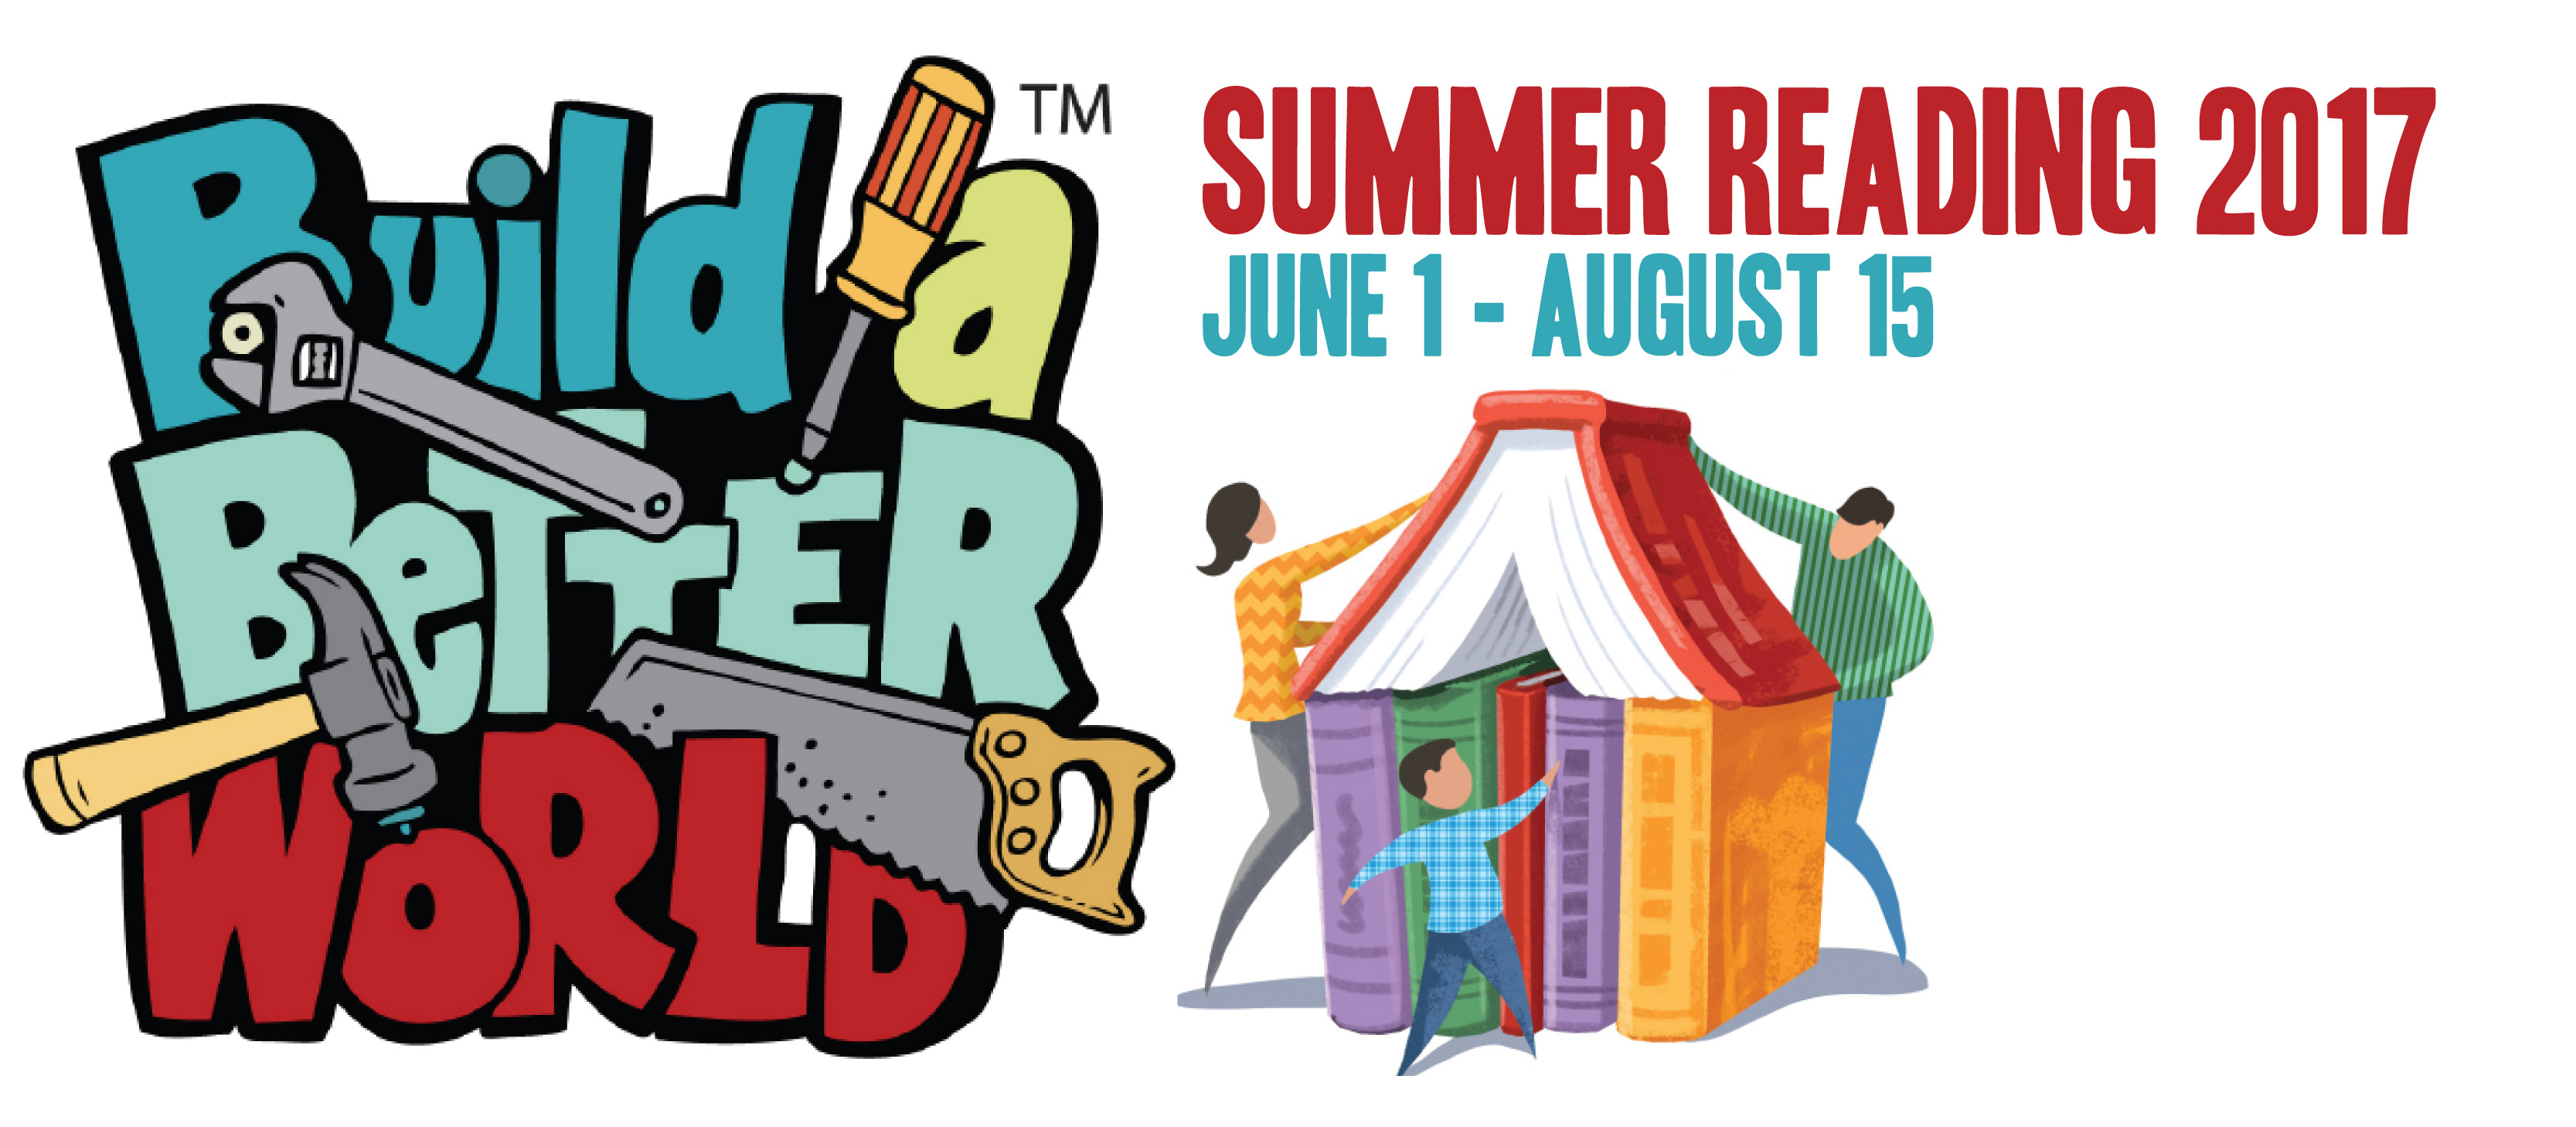 Summer Reading Program 2017 – Union County Library System